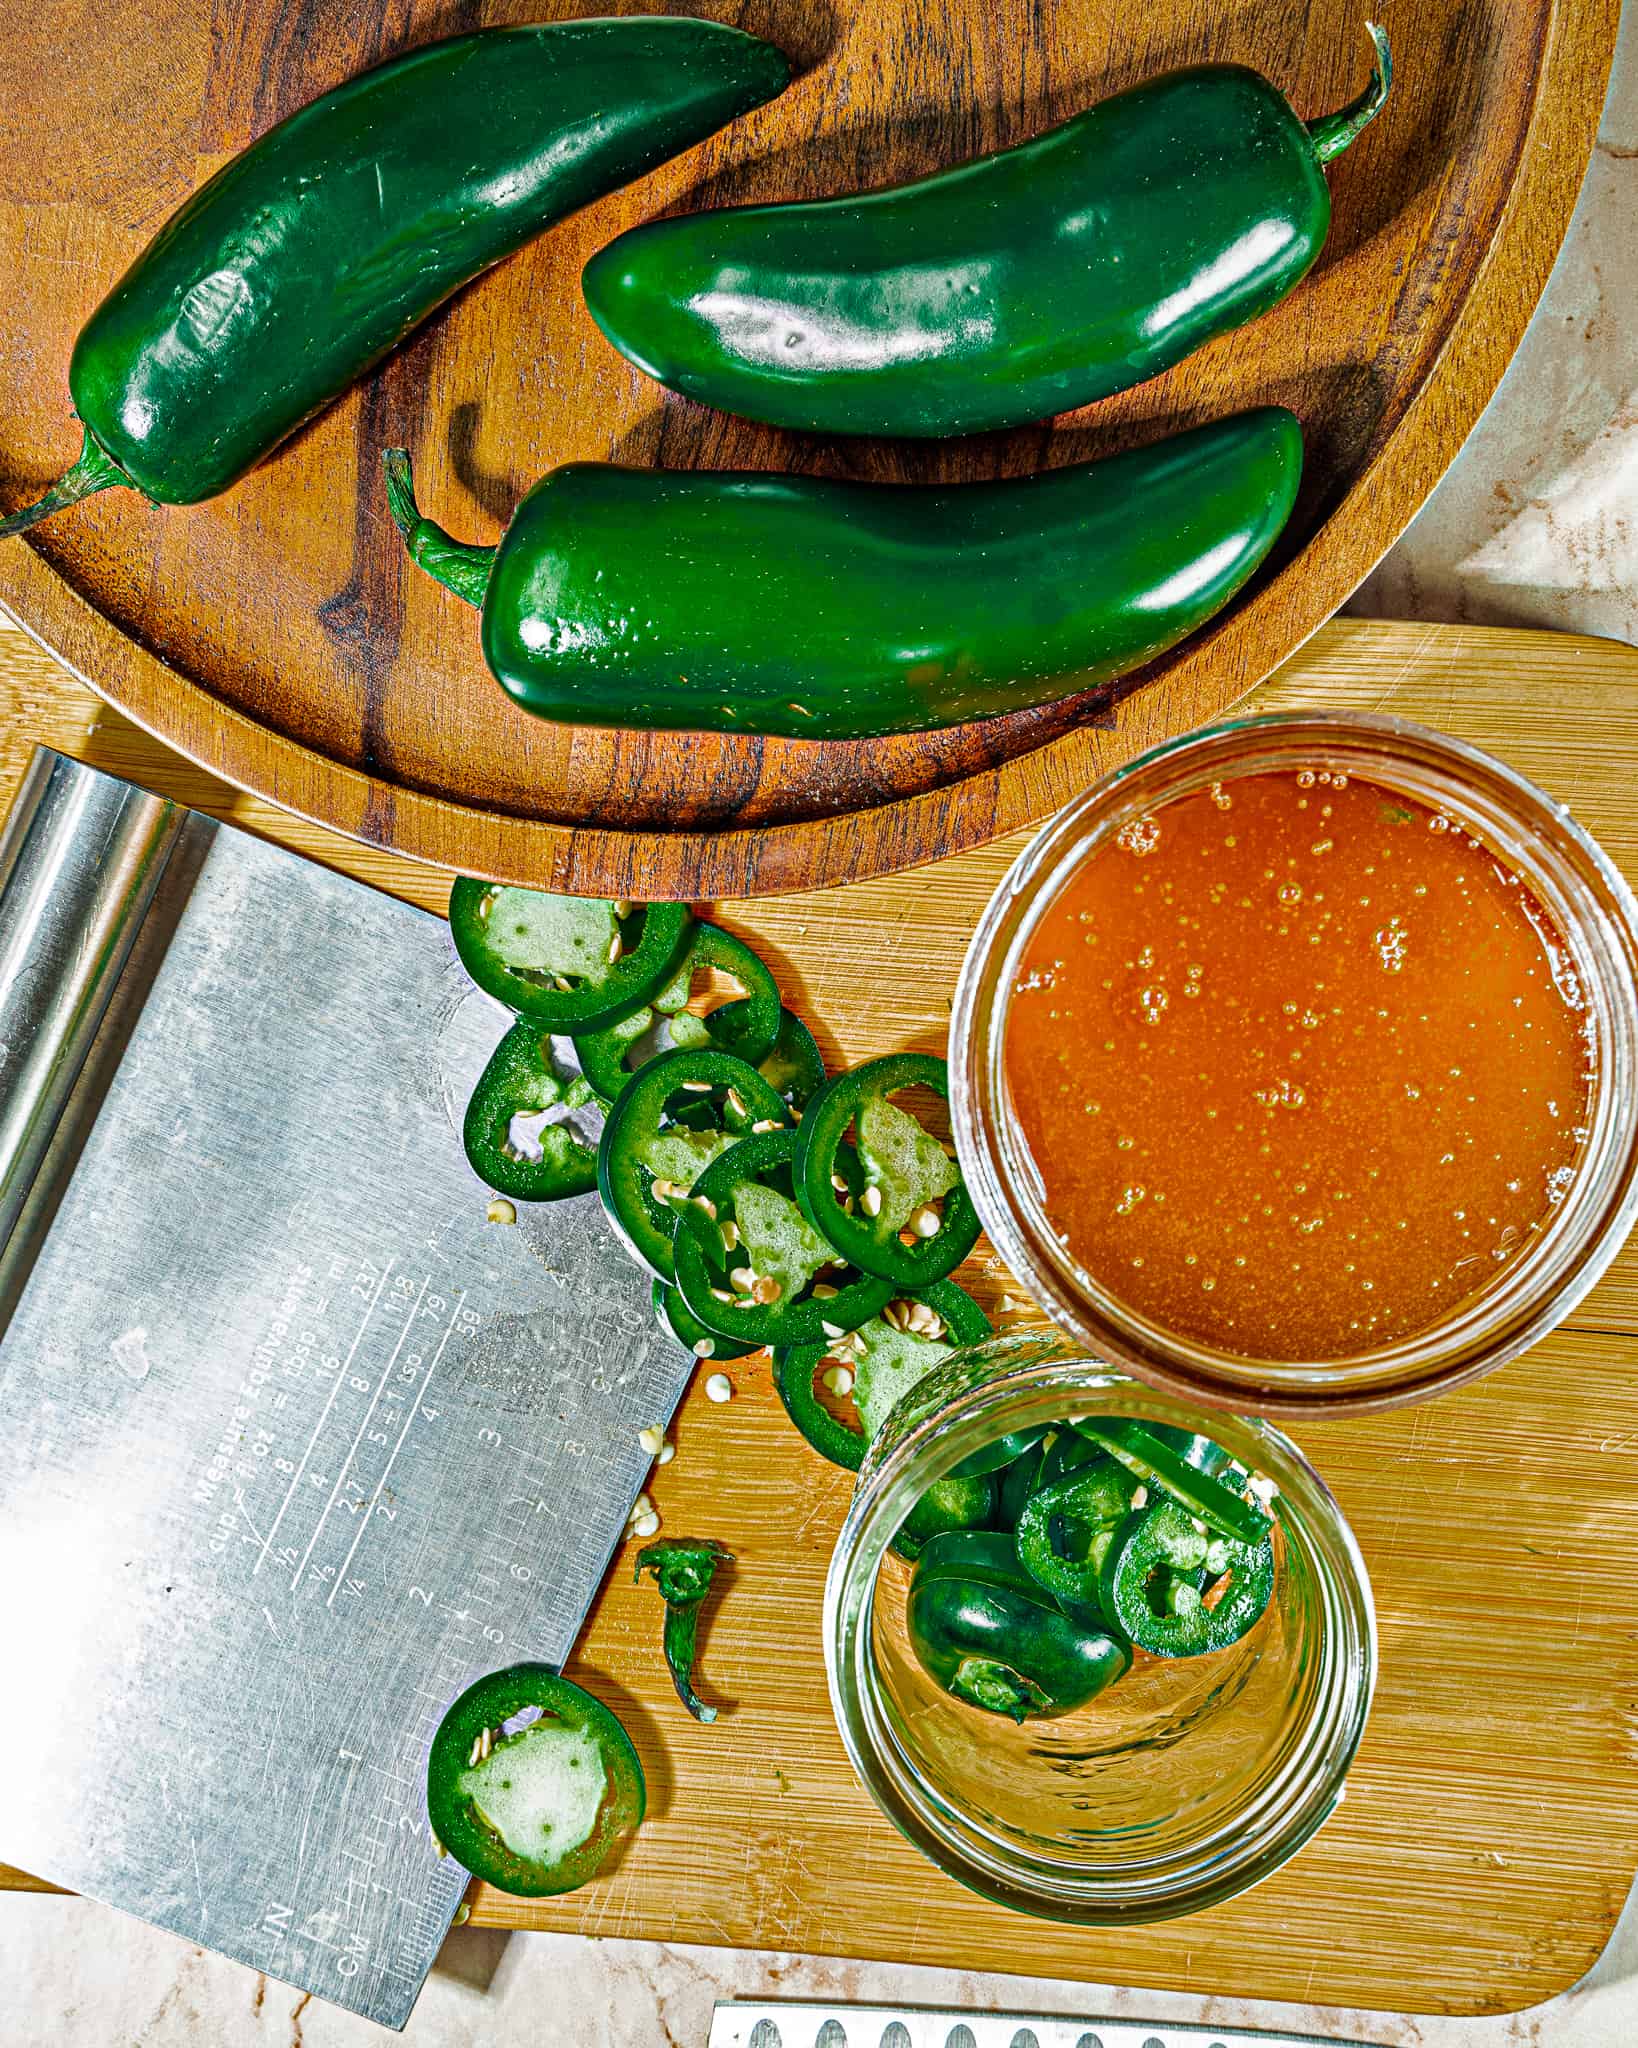 jalapeno peppers whole and sliced with jar of raw honey